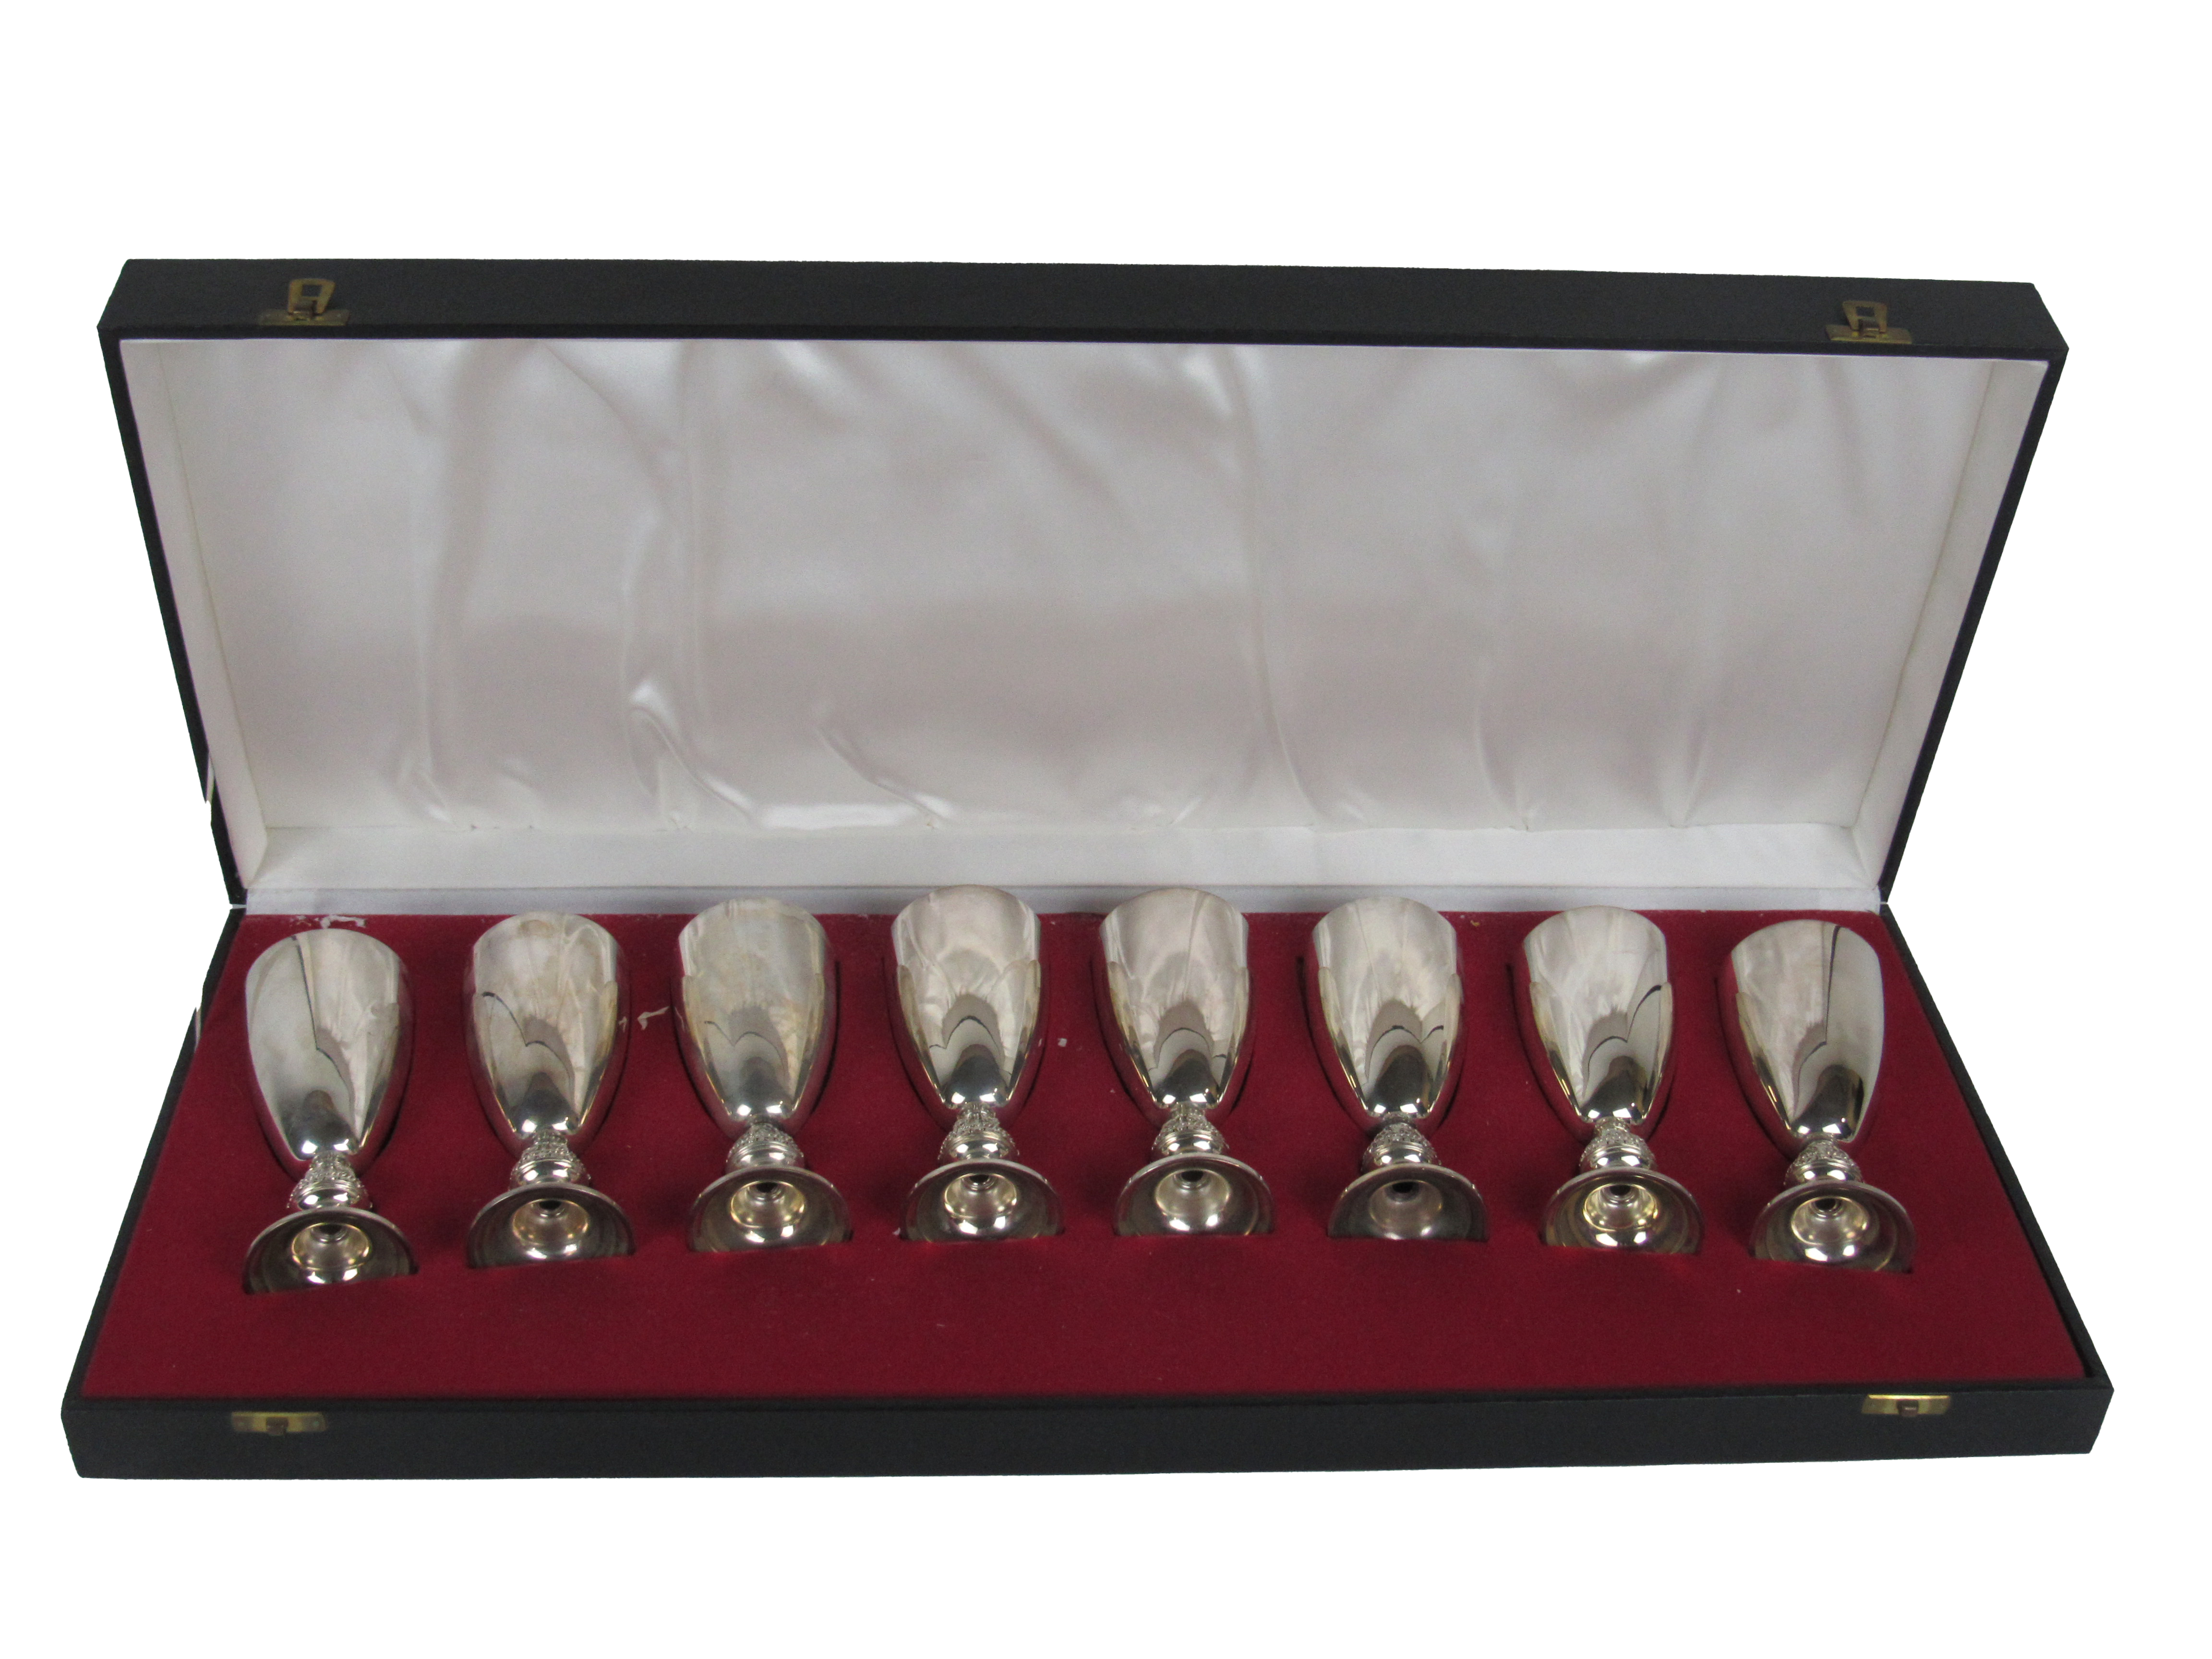 A cased set of 8 Irish silver gilt Wine Goblets, decorated in the Celtic Revival taste by Irish